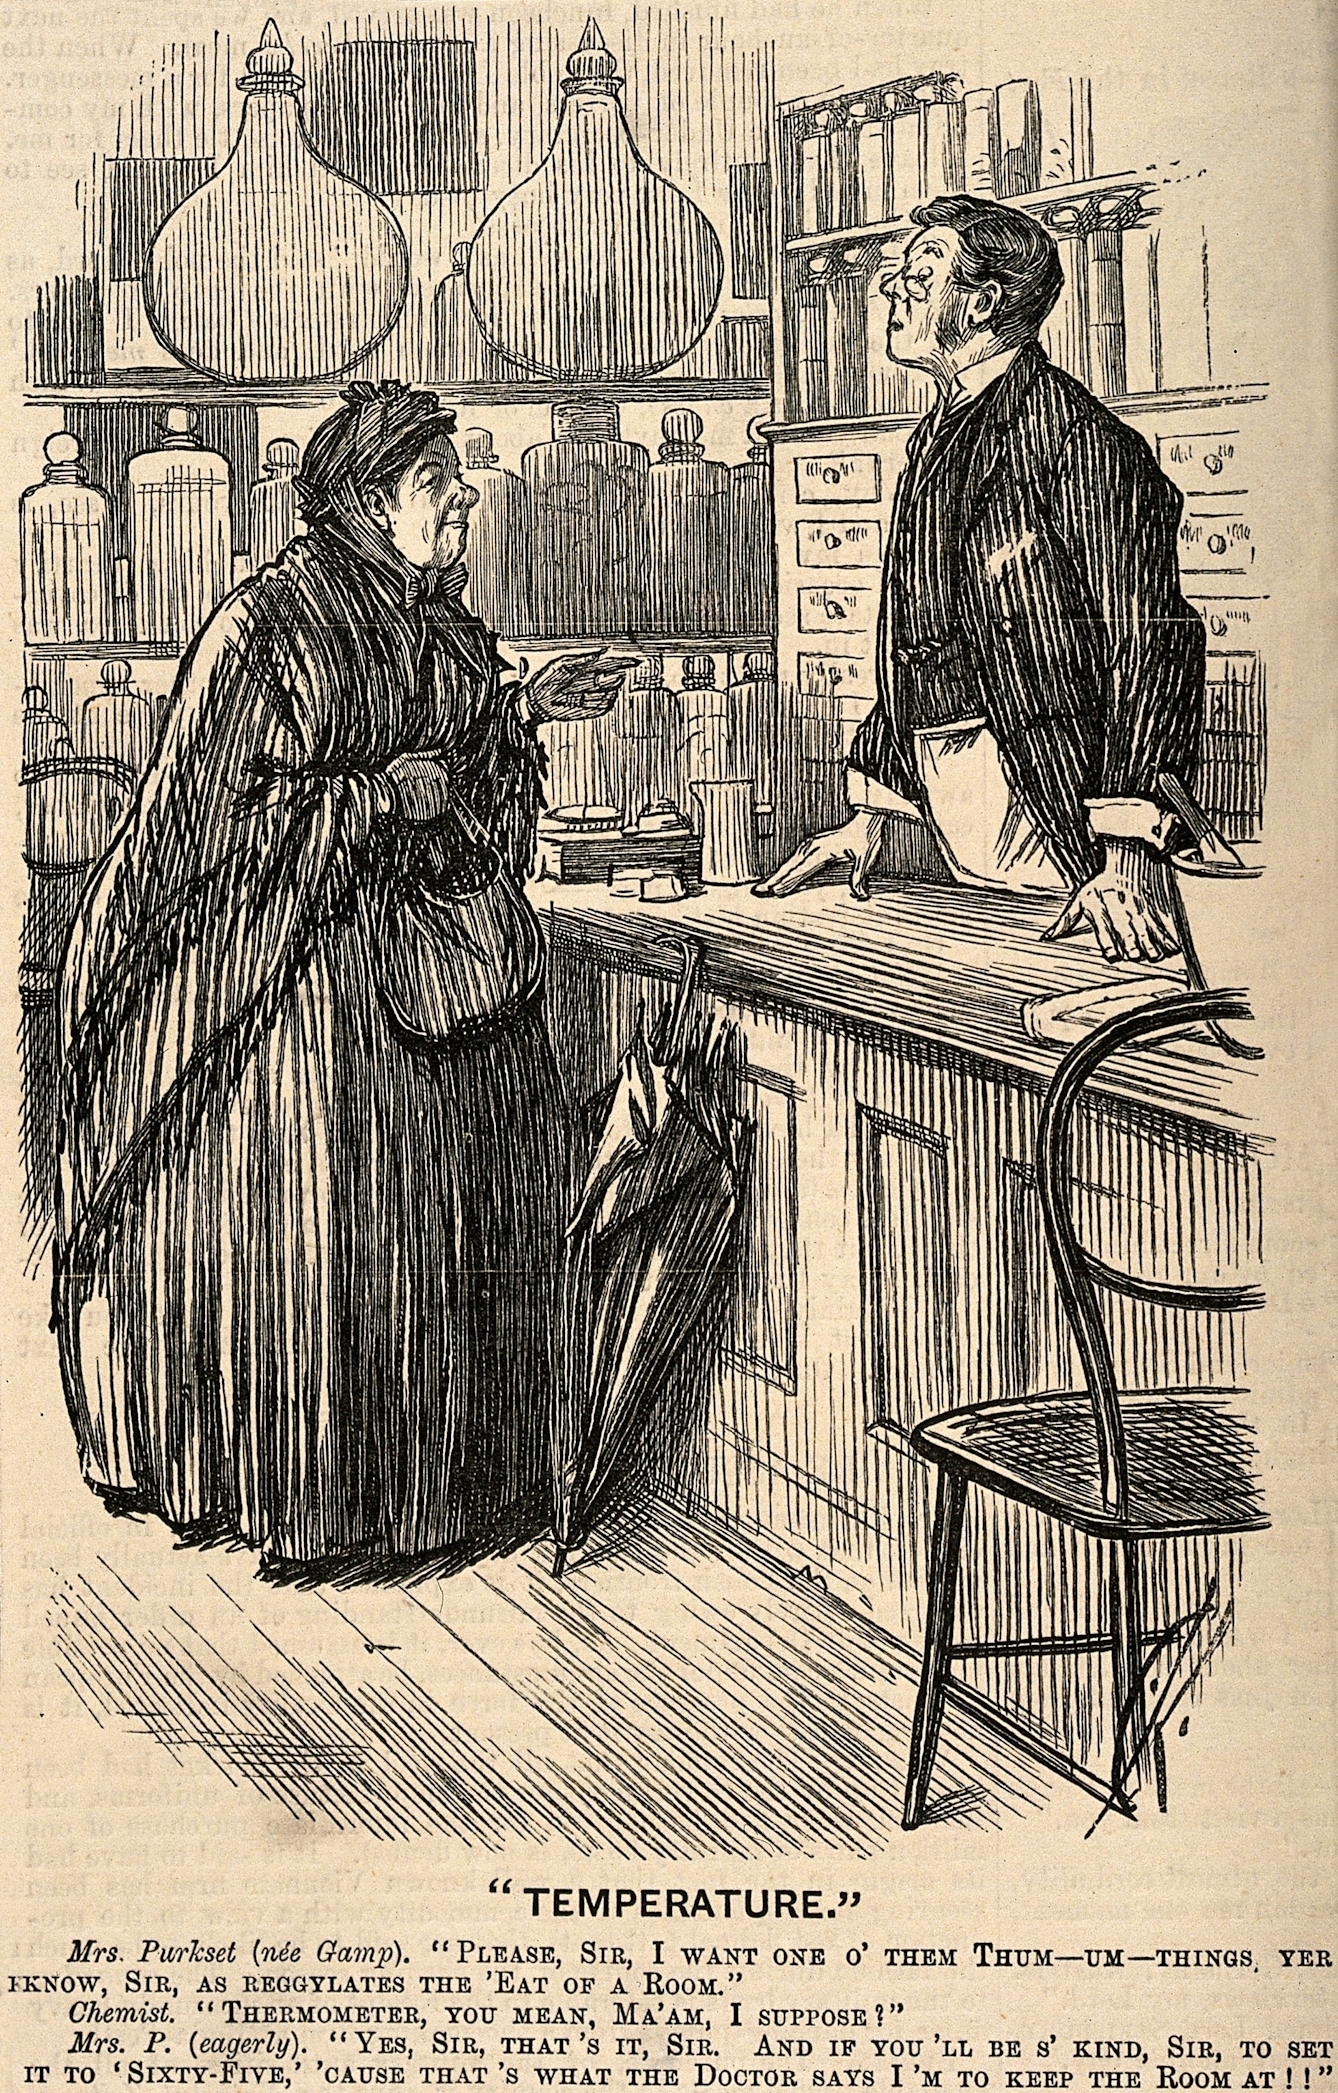 Etching showing an old woman in heavy Victorian clothing and shawls, with her bag and an umbrella propped against the counter of a pharmacist. The pharmacist looks down through his spectacles at her. The work is titled "Temperature" and reads "Mrs Purkset (nee Gamp) "Please Sir, I want one o' them thum-um-things, yer know, sir, as regylates the 'eat of a room." Chemist "Thermometer, you mean, ma'am, I suppose!"
Mrs P. (eagerly) "Yes, sir, that's it Sir. And if you'll be s'kind, sir, to set it to 'sixty-five', 'cause that's what the Doctor says I'm to keep the room at!!"